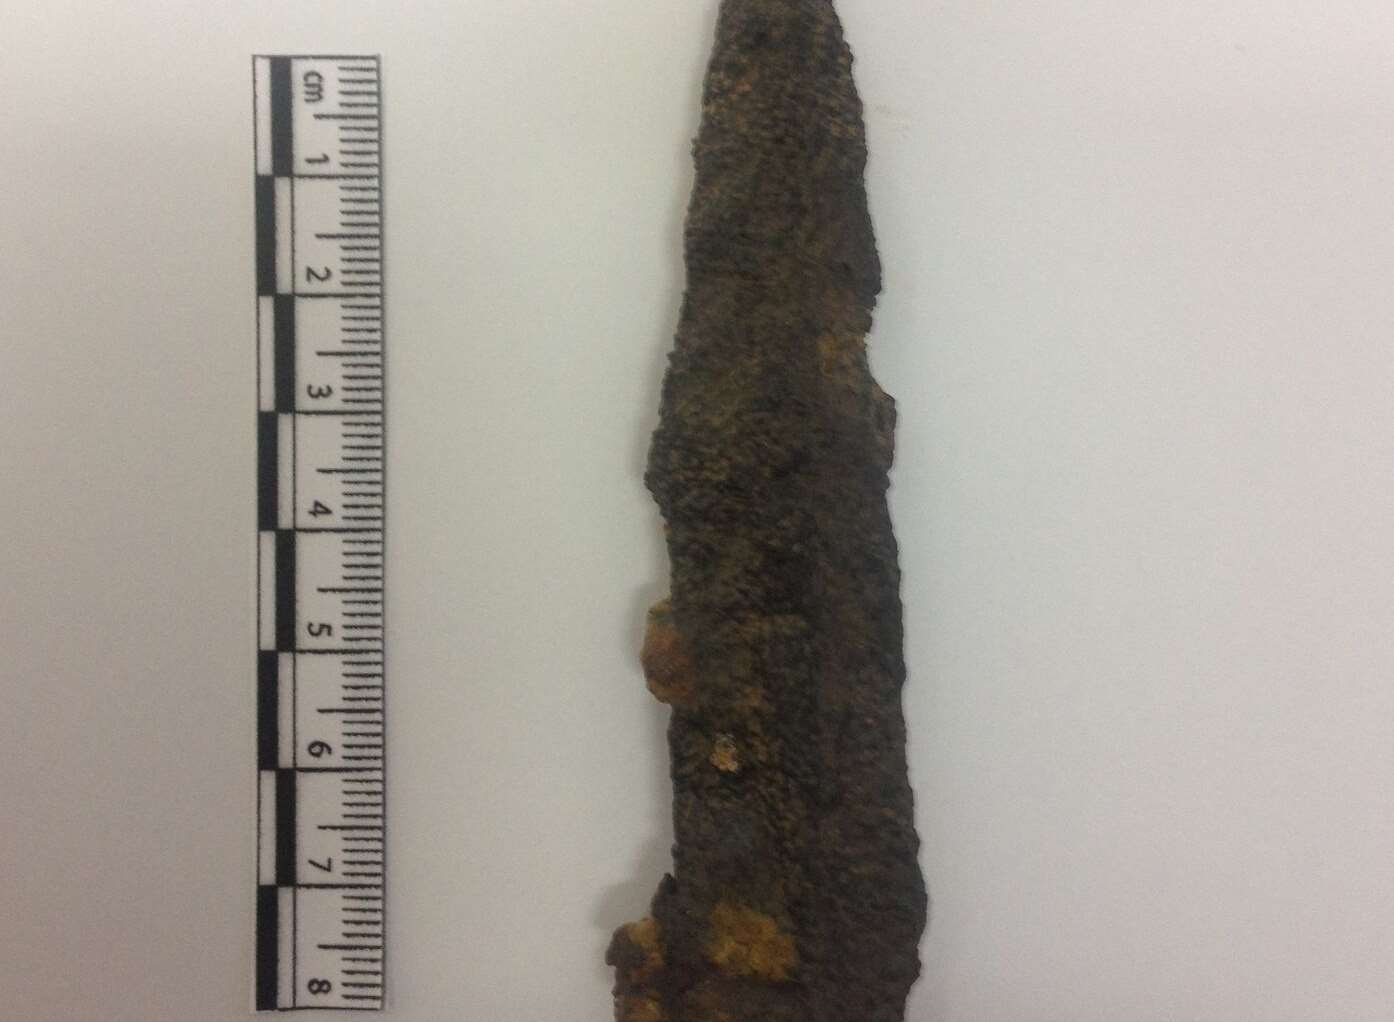 An iron shank discovered at Ebbsleet. Picture: SWNS